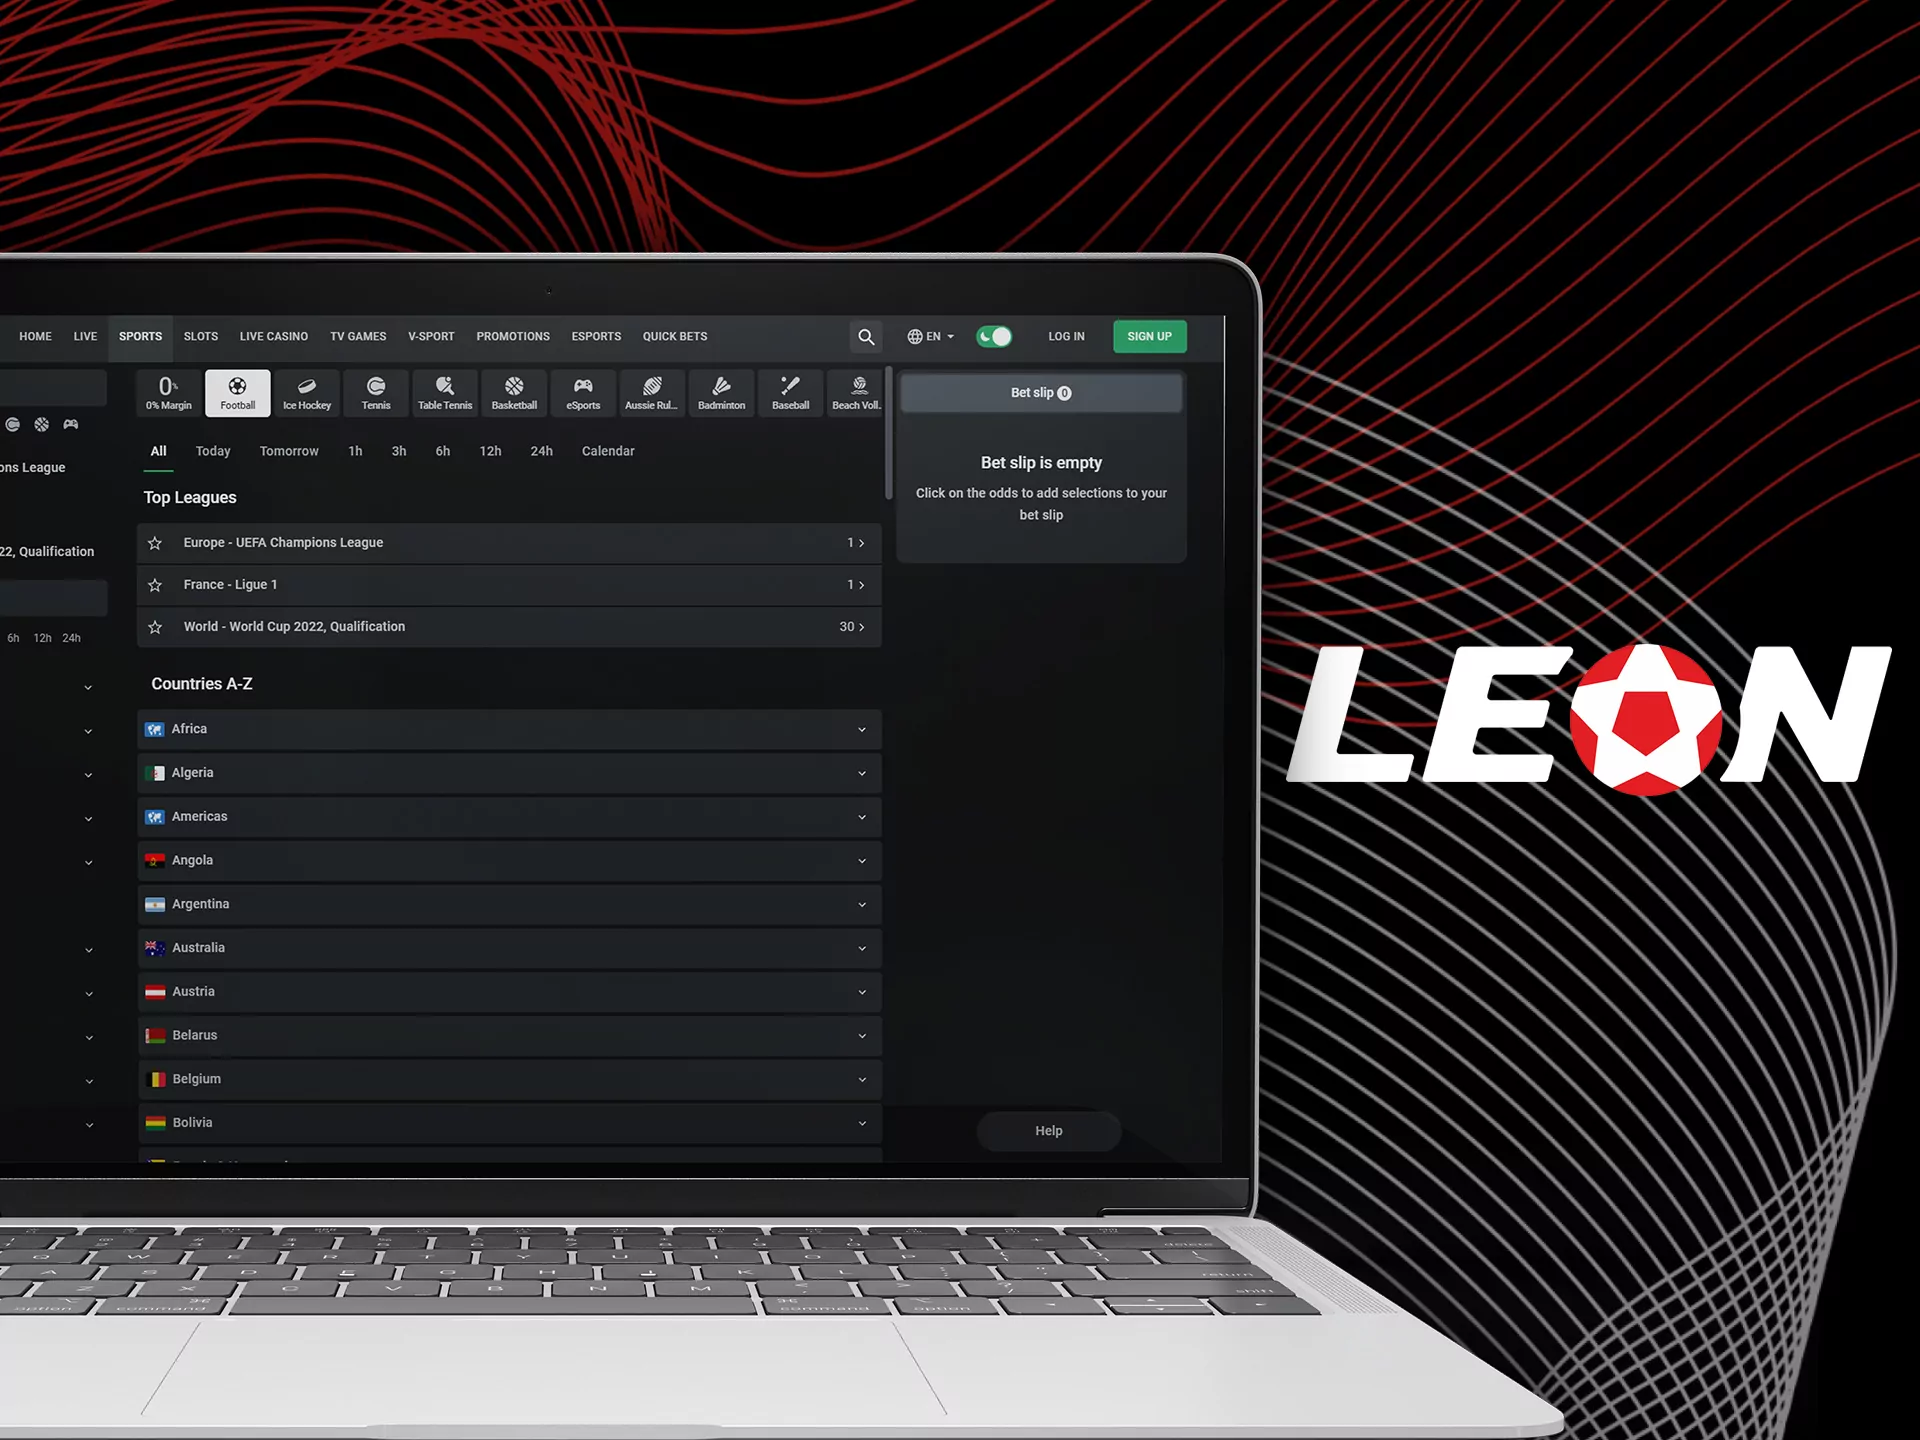 You can install the Leon Bet app on your laptop or PC.